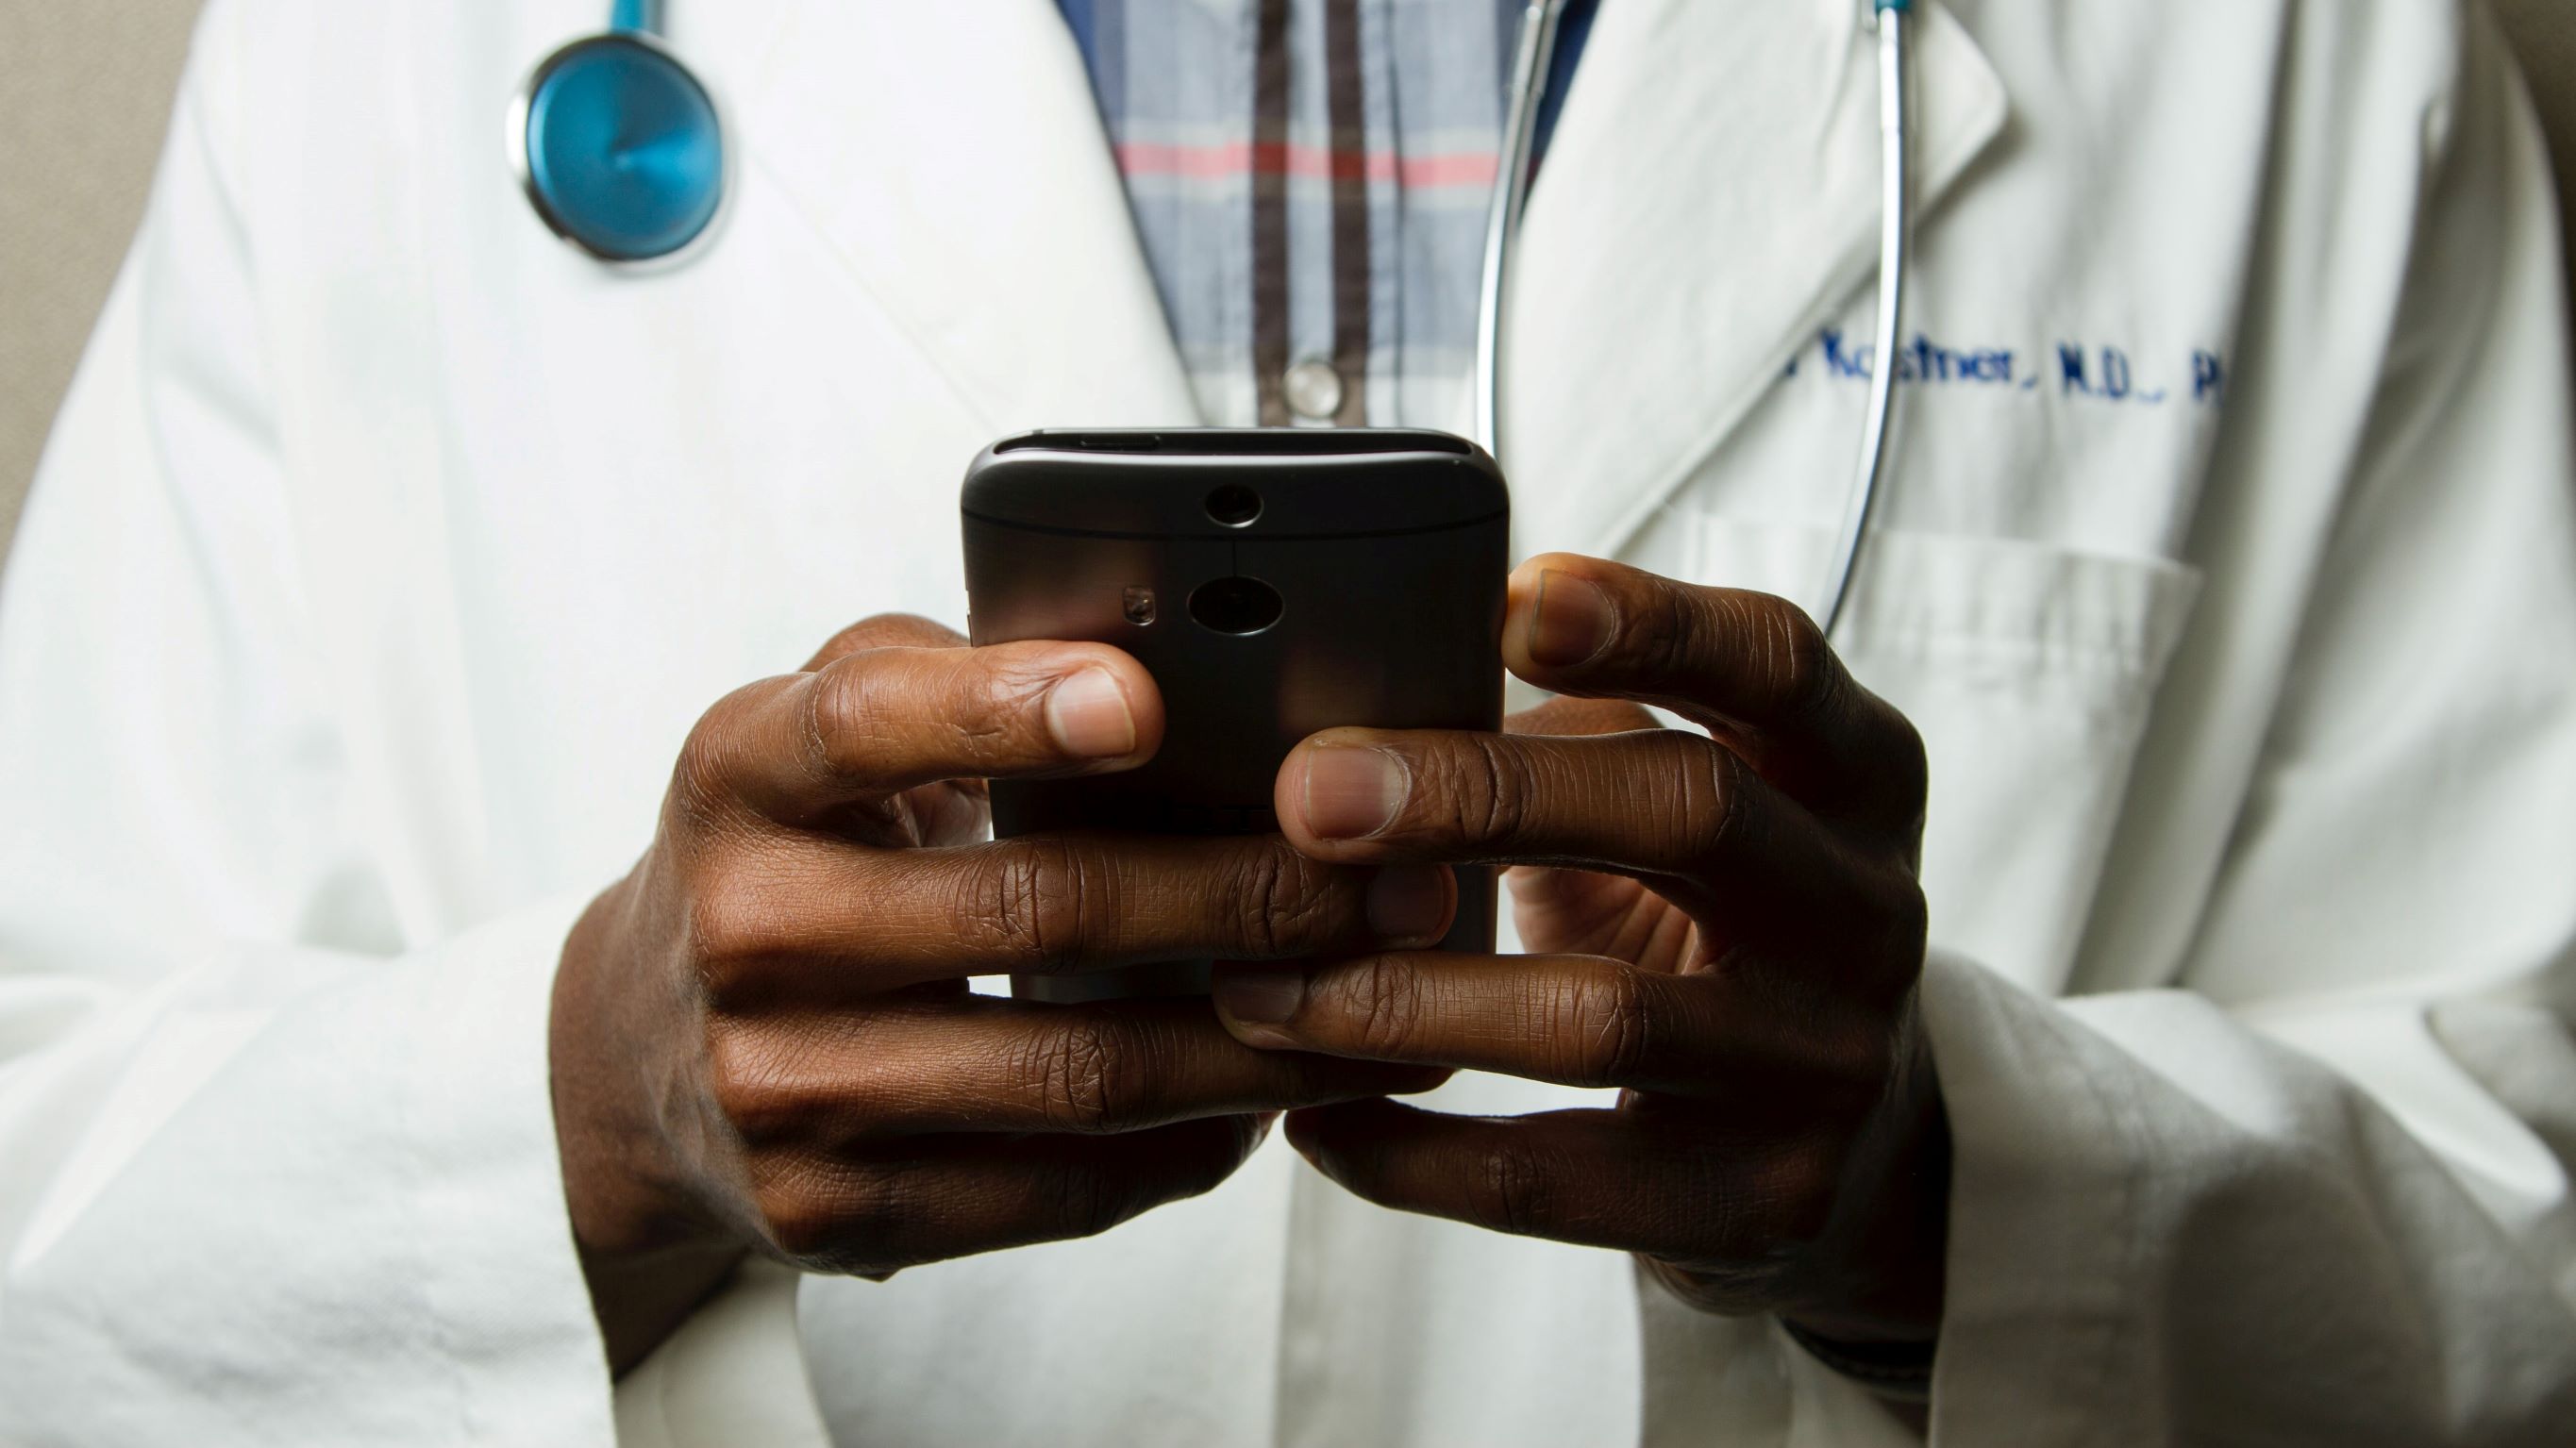 Closeup of a doctor's hands using a smartphone.